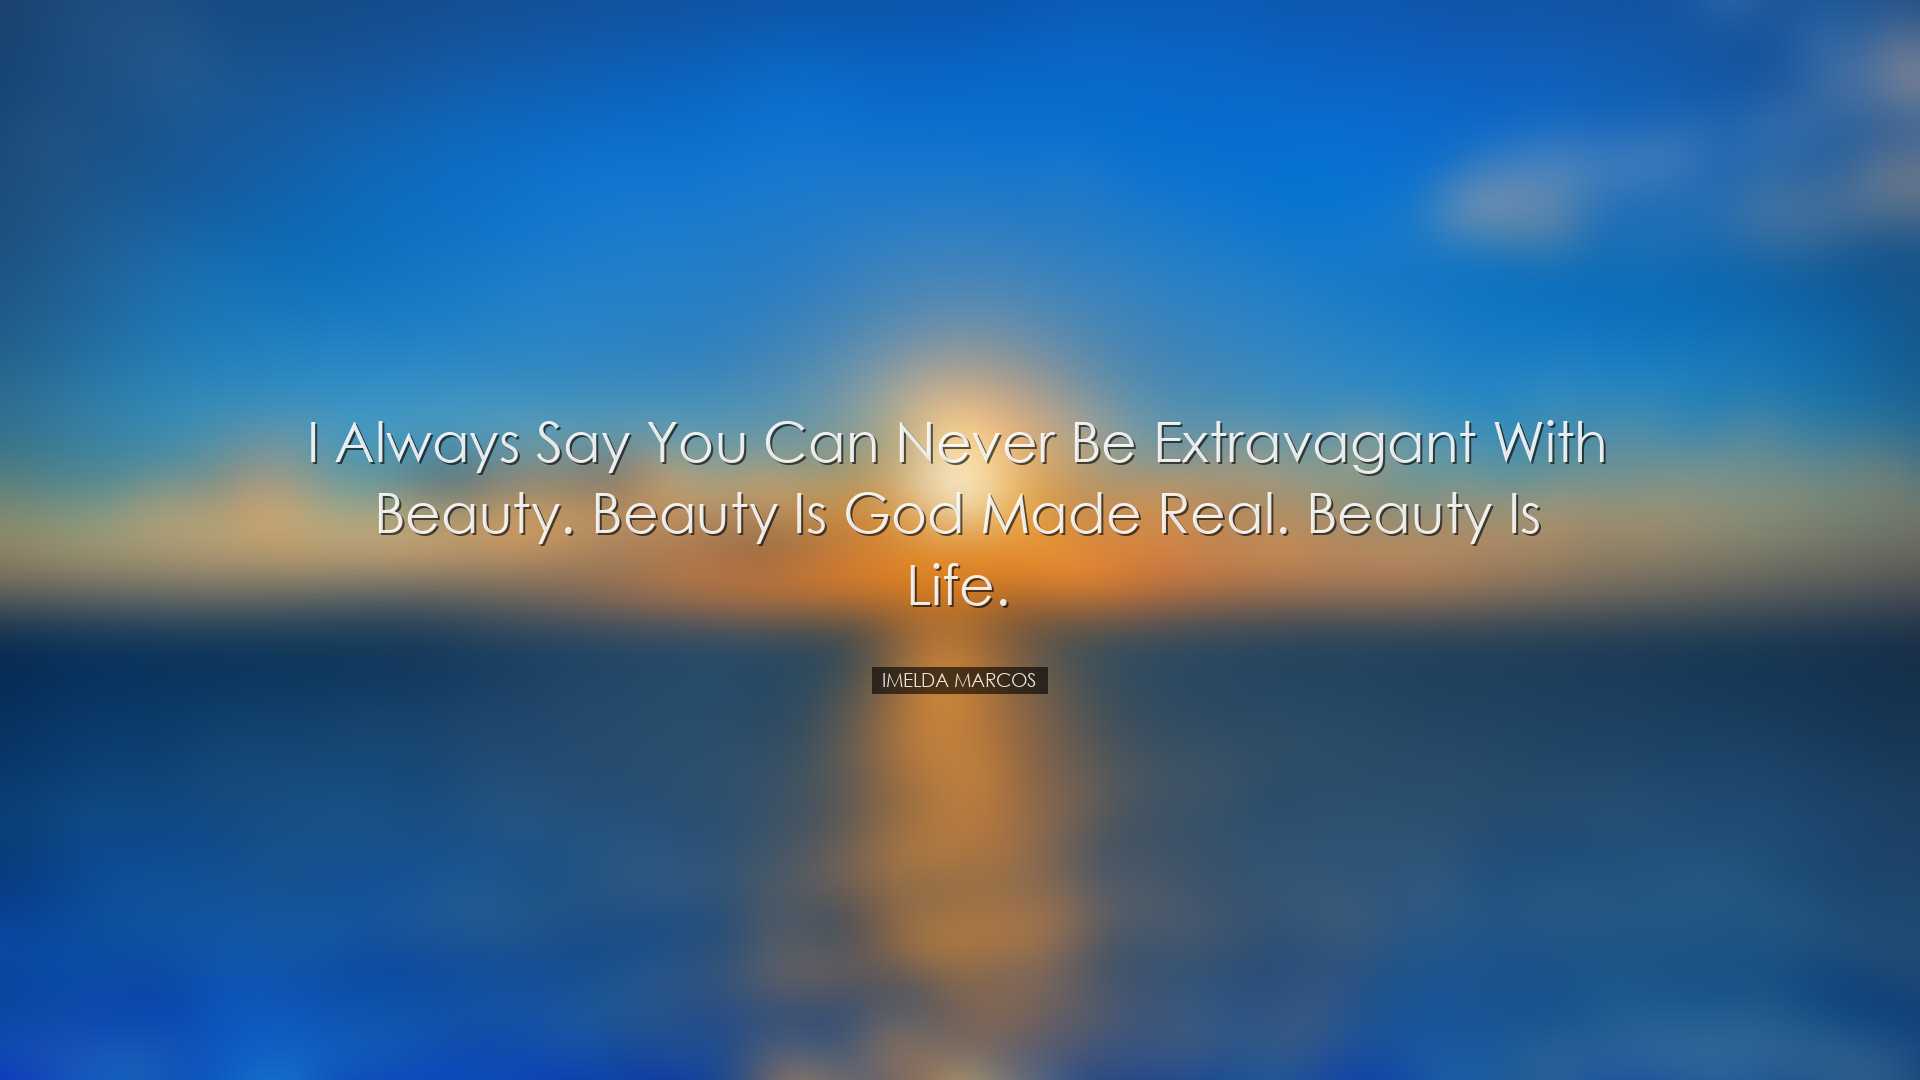 I always say you can never be extravagant with beauty. Beauty is G